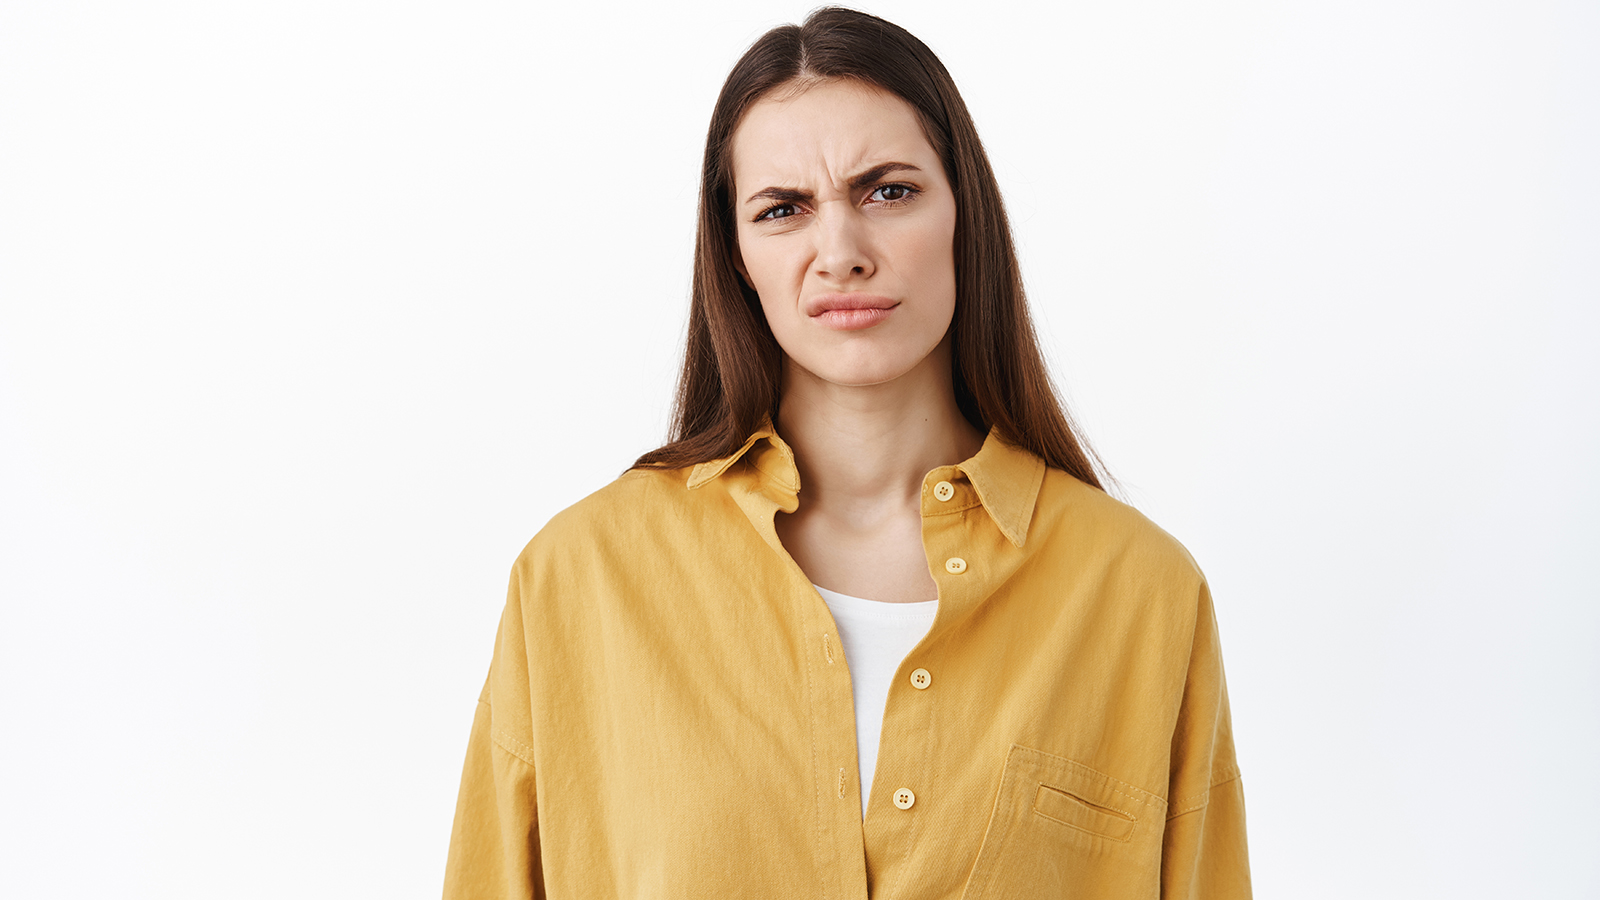 Woman grimacing and frowning as looking at something bad, cringe from awful content, stare disappointed and judgemental, judging express dislike, standing over white background